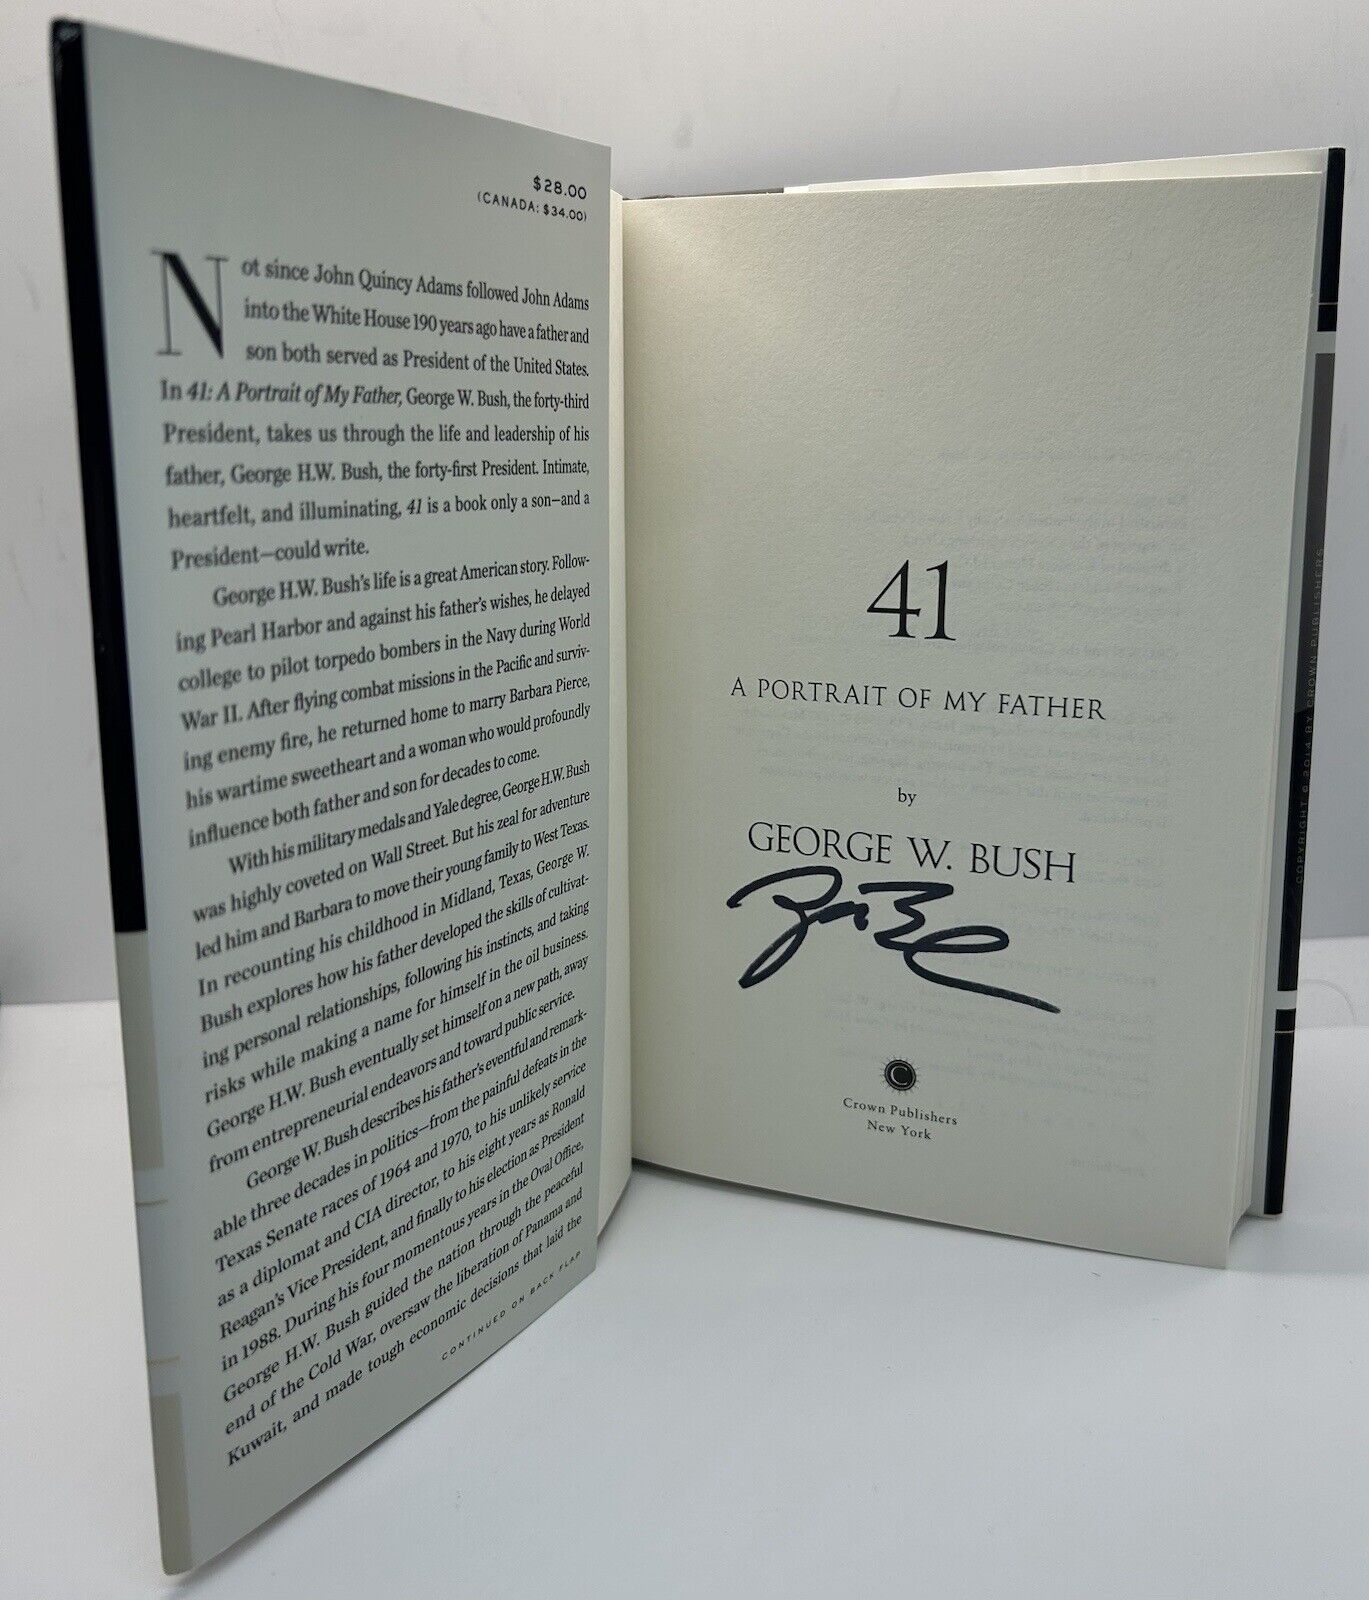 George W. Bush Signed 41 A Portrait of My Father Book Autographed